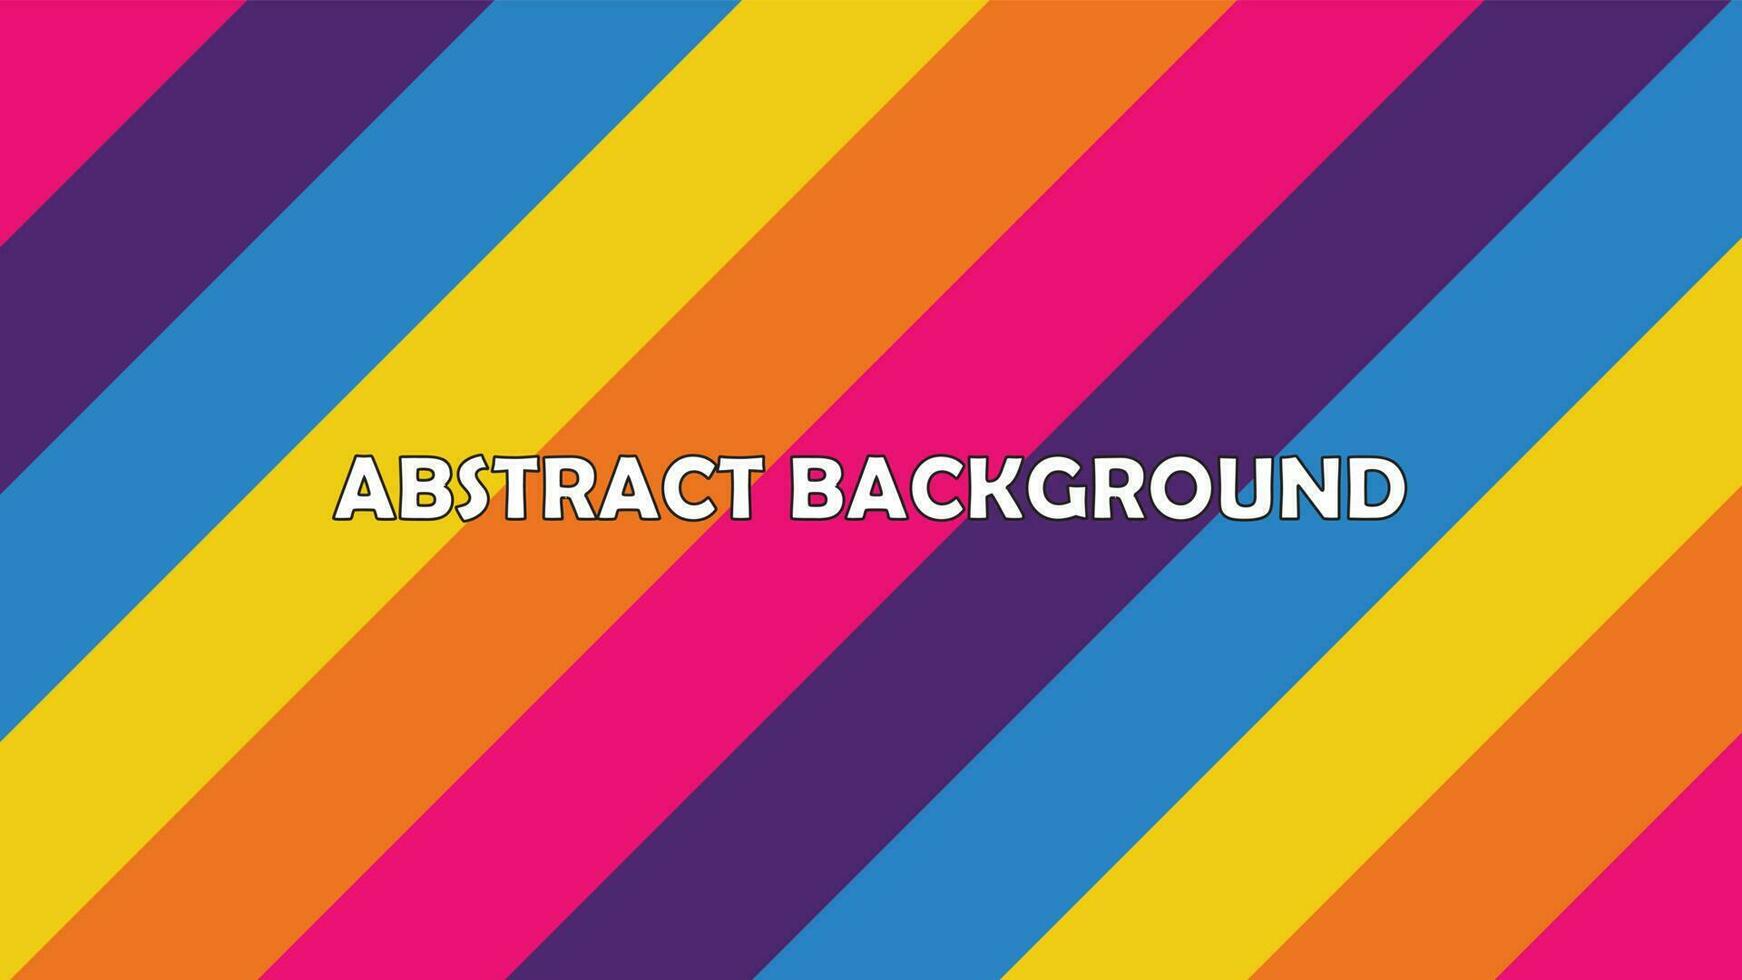 Abstract background colorful good for website, design, wallpaper, background, sosial media content, print, mockup vector